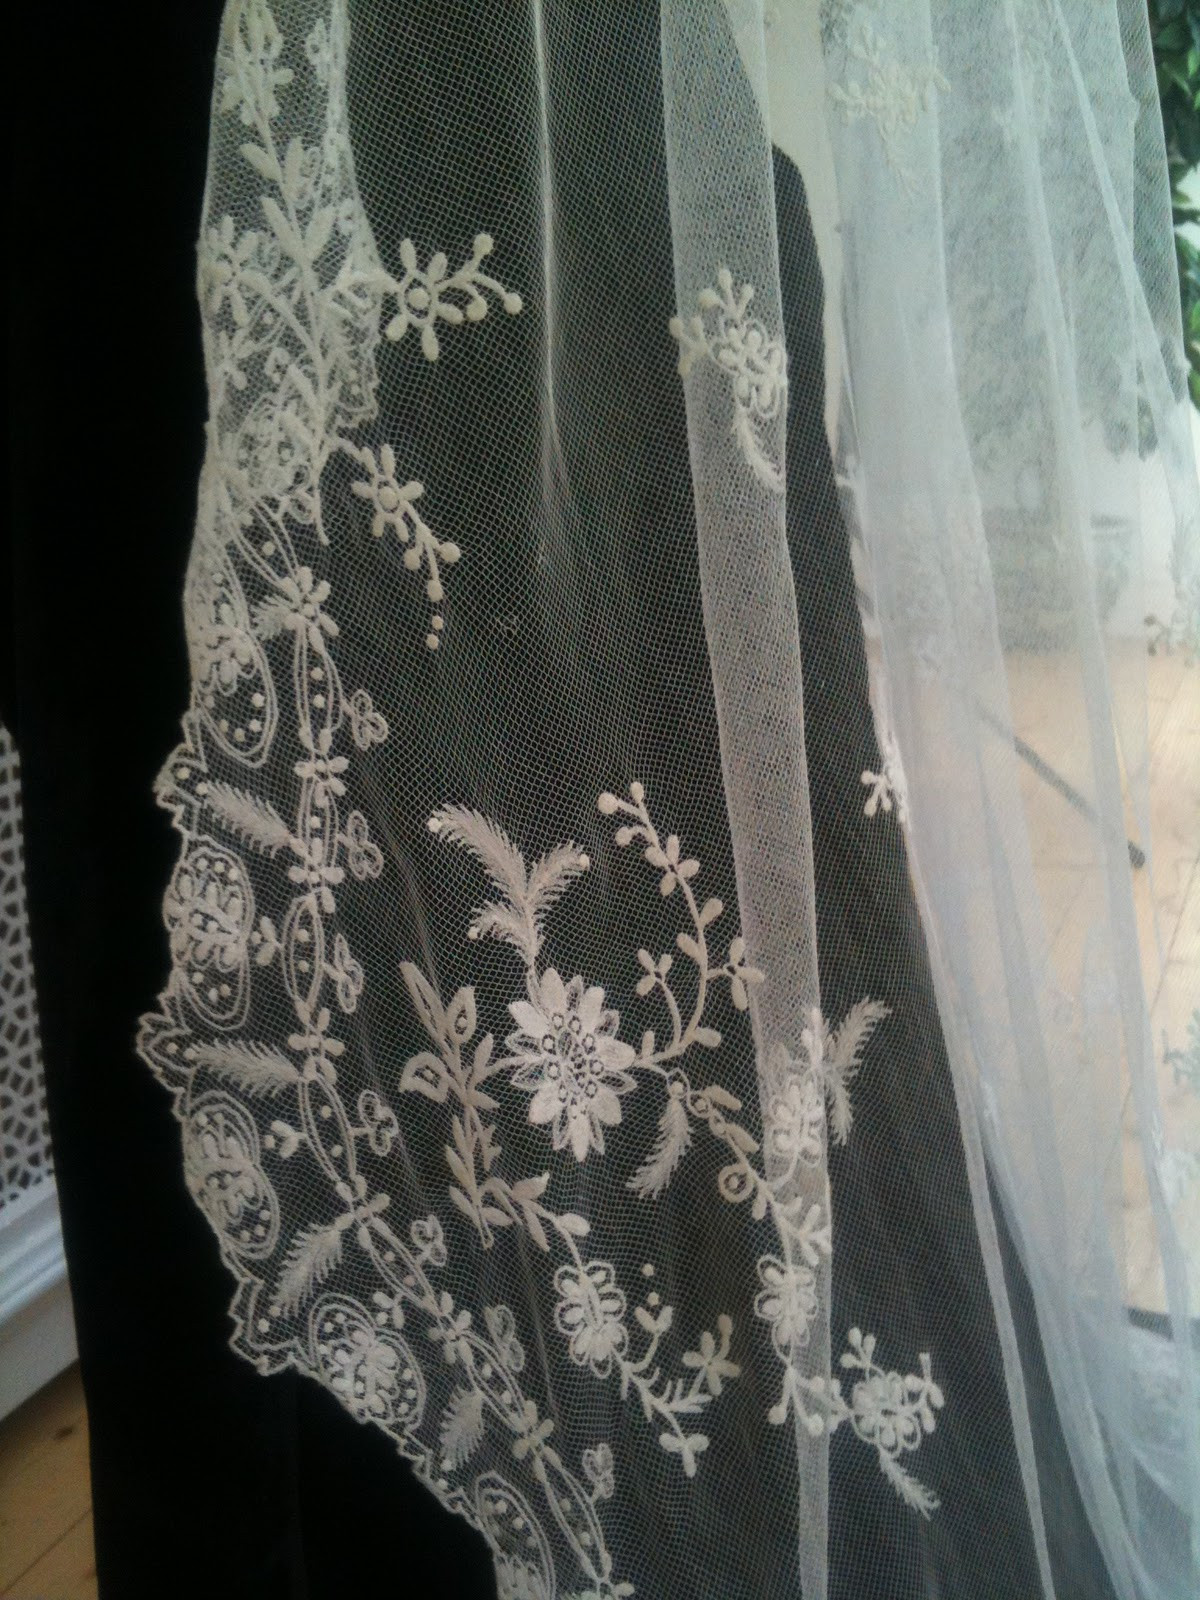 Vintage Wedding Veils For Sale
 Rosemary Cathcart Antique Lace and Vintage Fashion